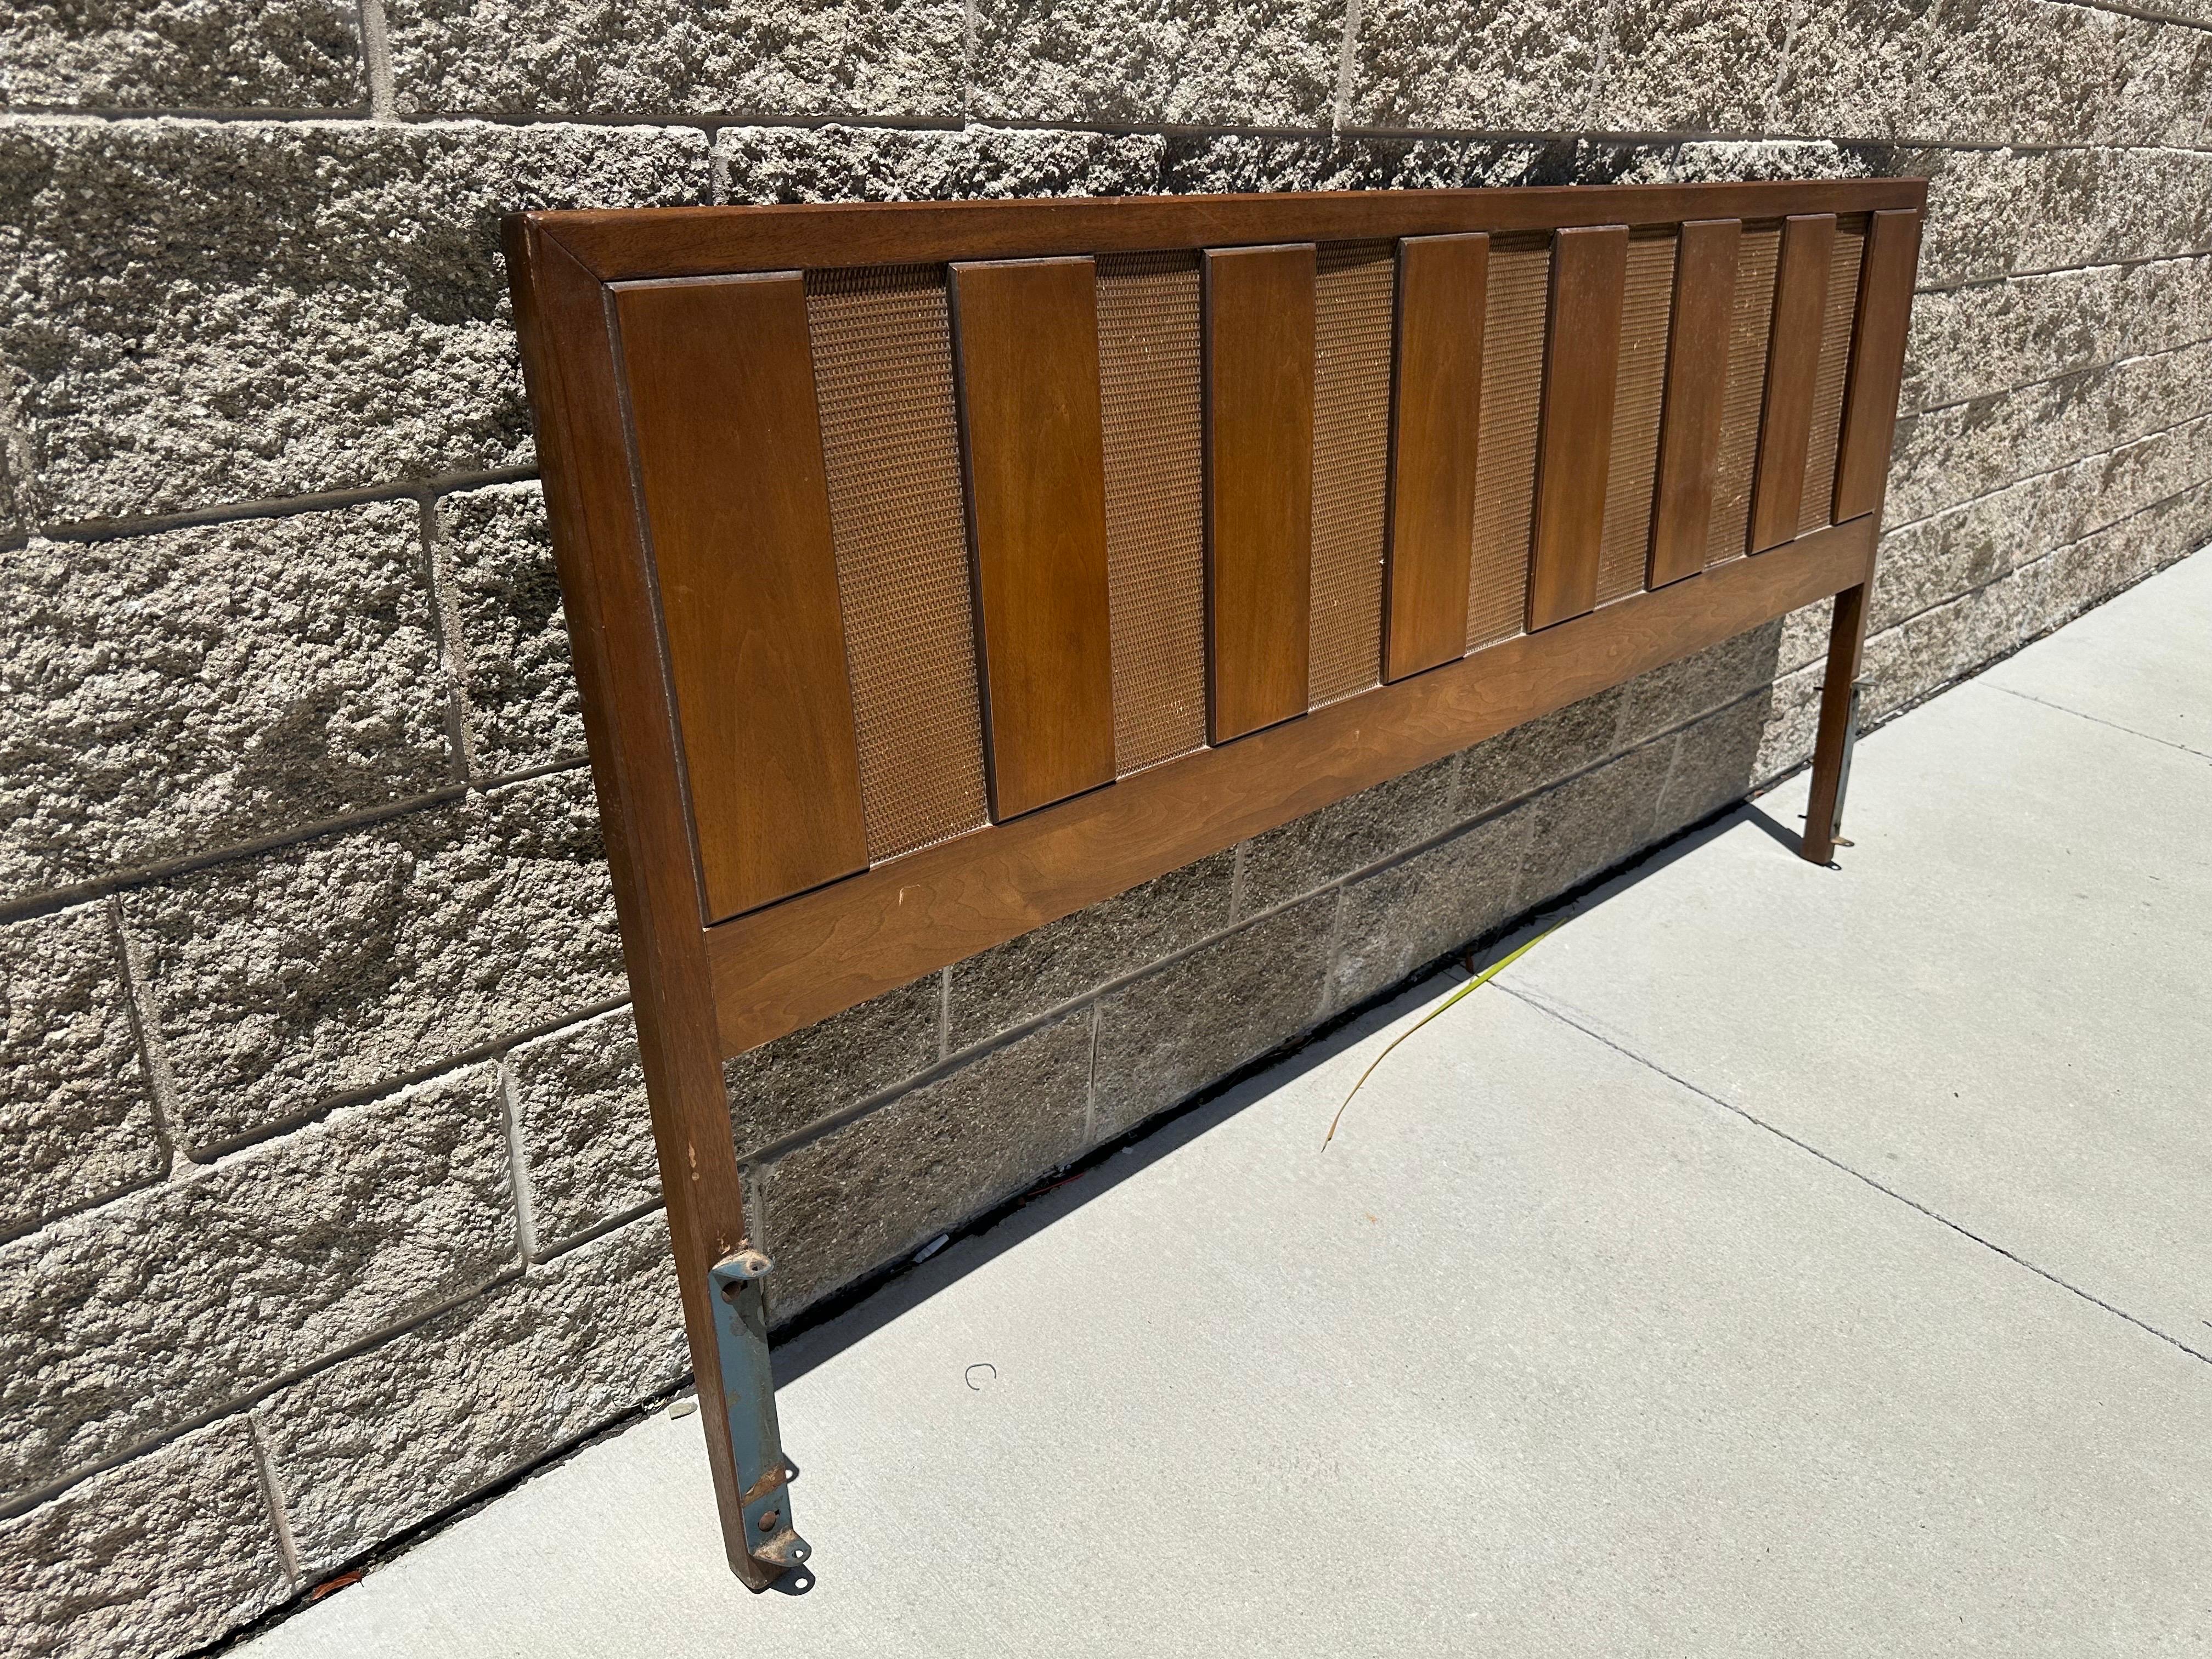 Add a touch of retro flair to your bedroom with this vintage king size headboard. Crafted from high-quality walnut wood in a mid-century modern style, this headboard is the perfect choice for anyone who loves classic design. The rich brown color